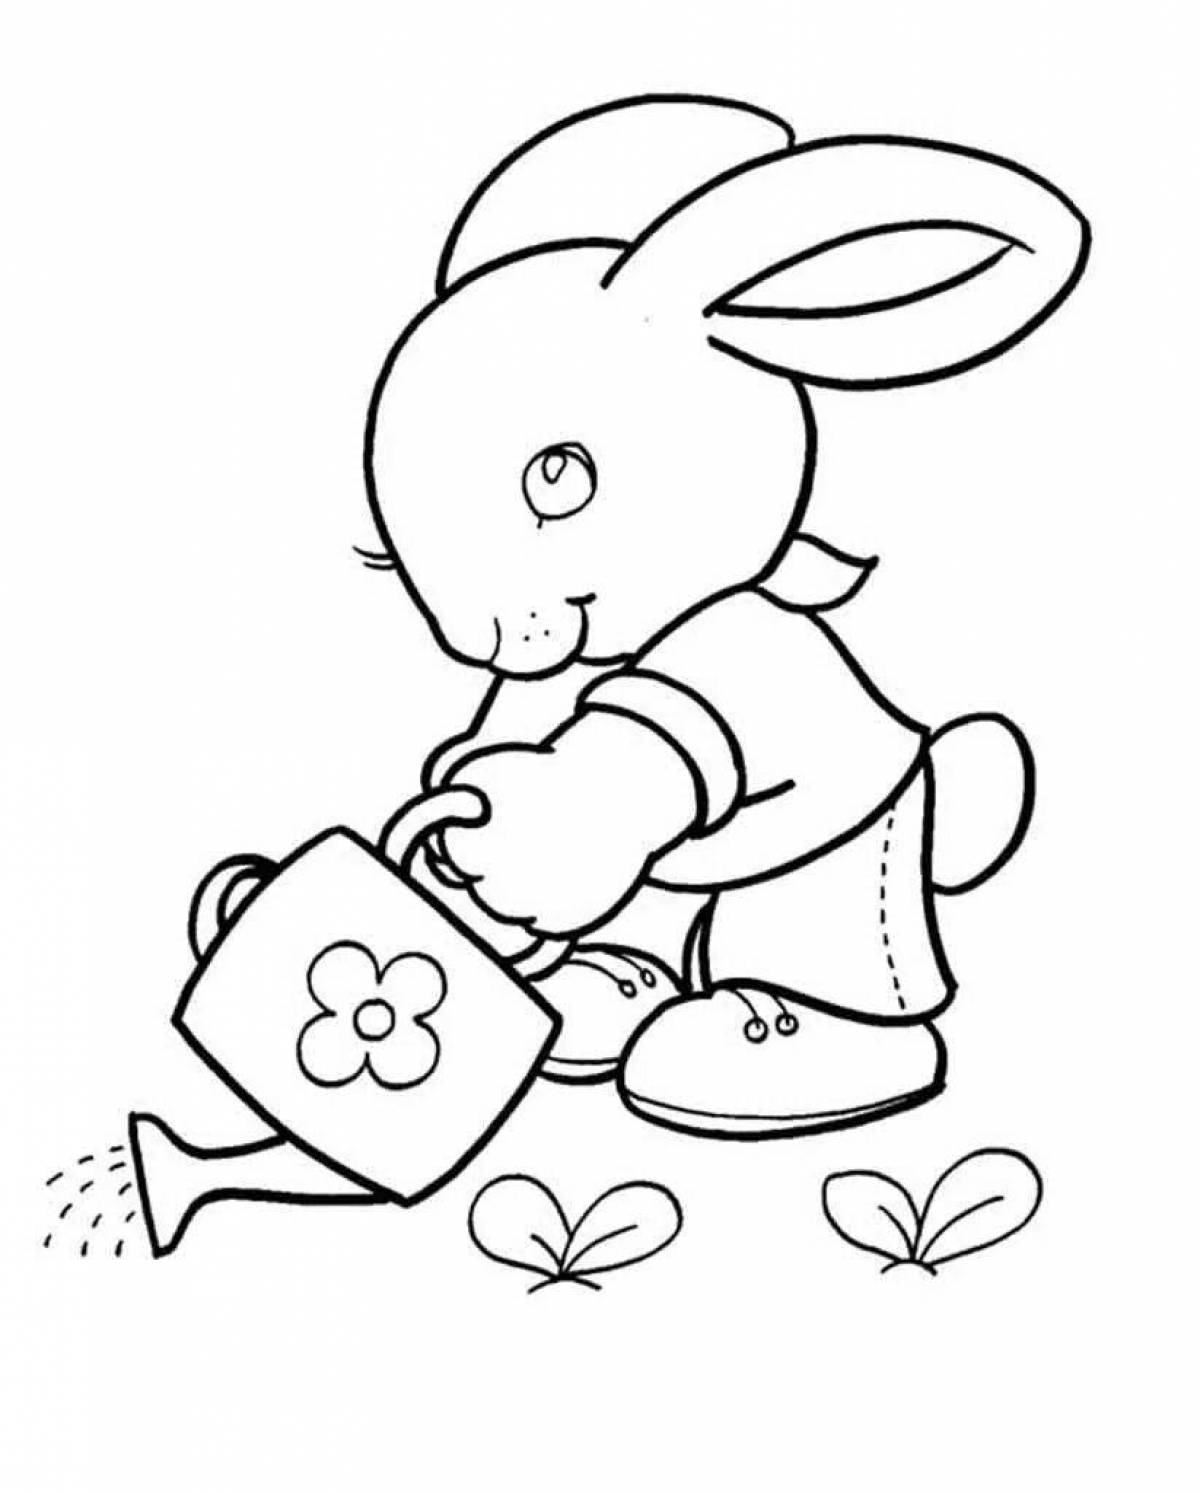 Coloring page with hanging ears baby bunny